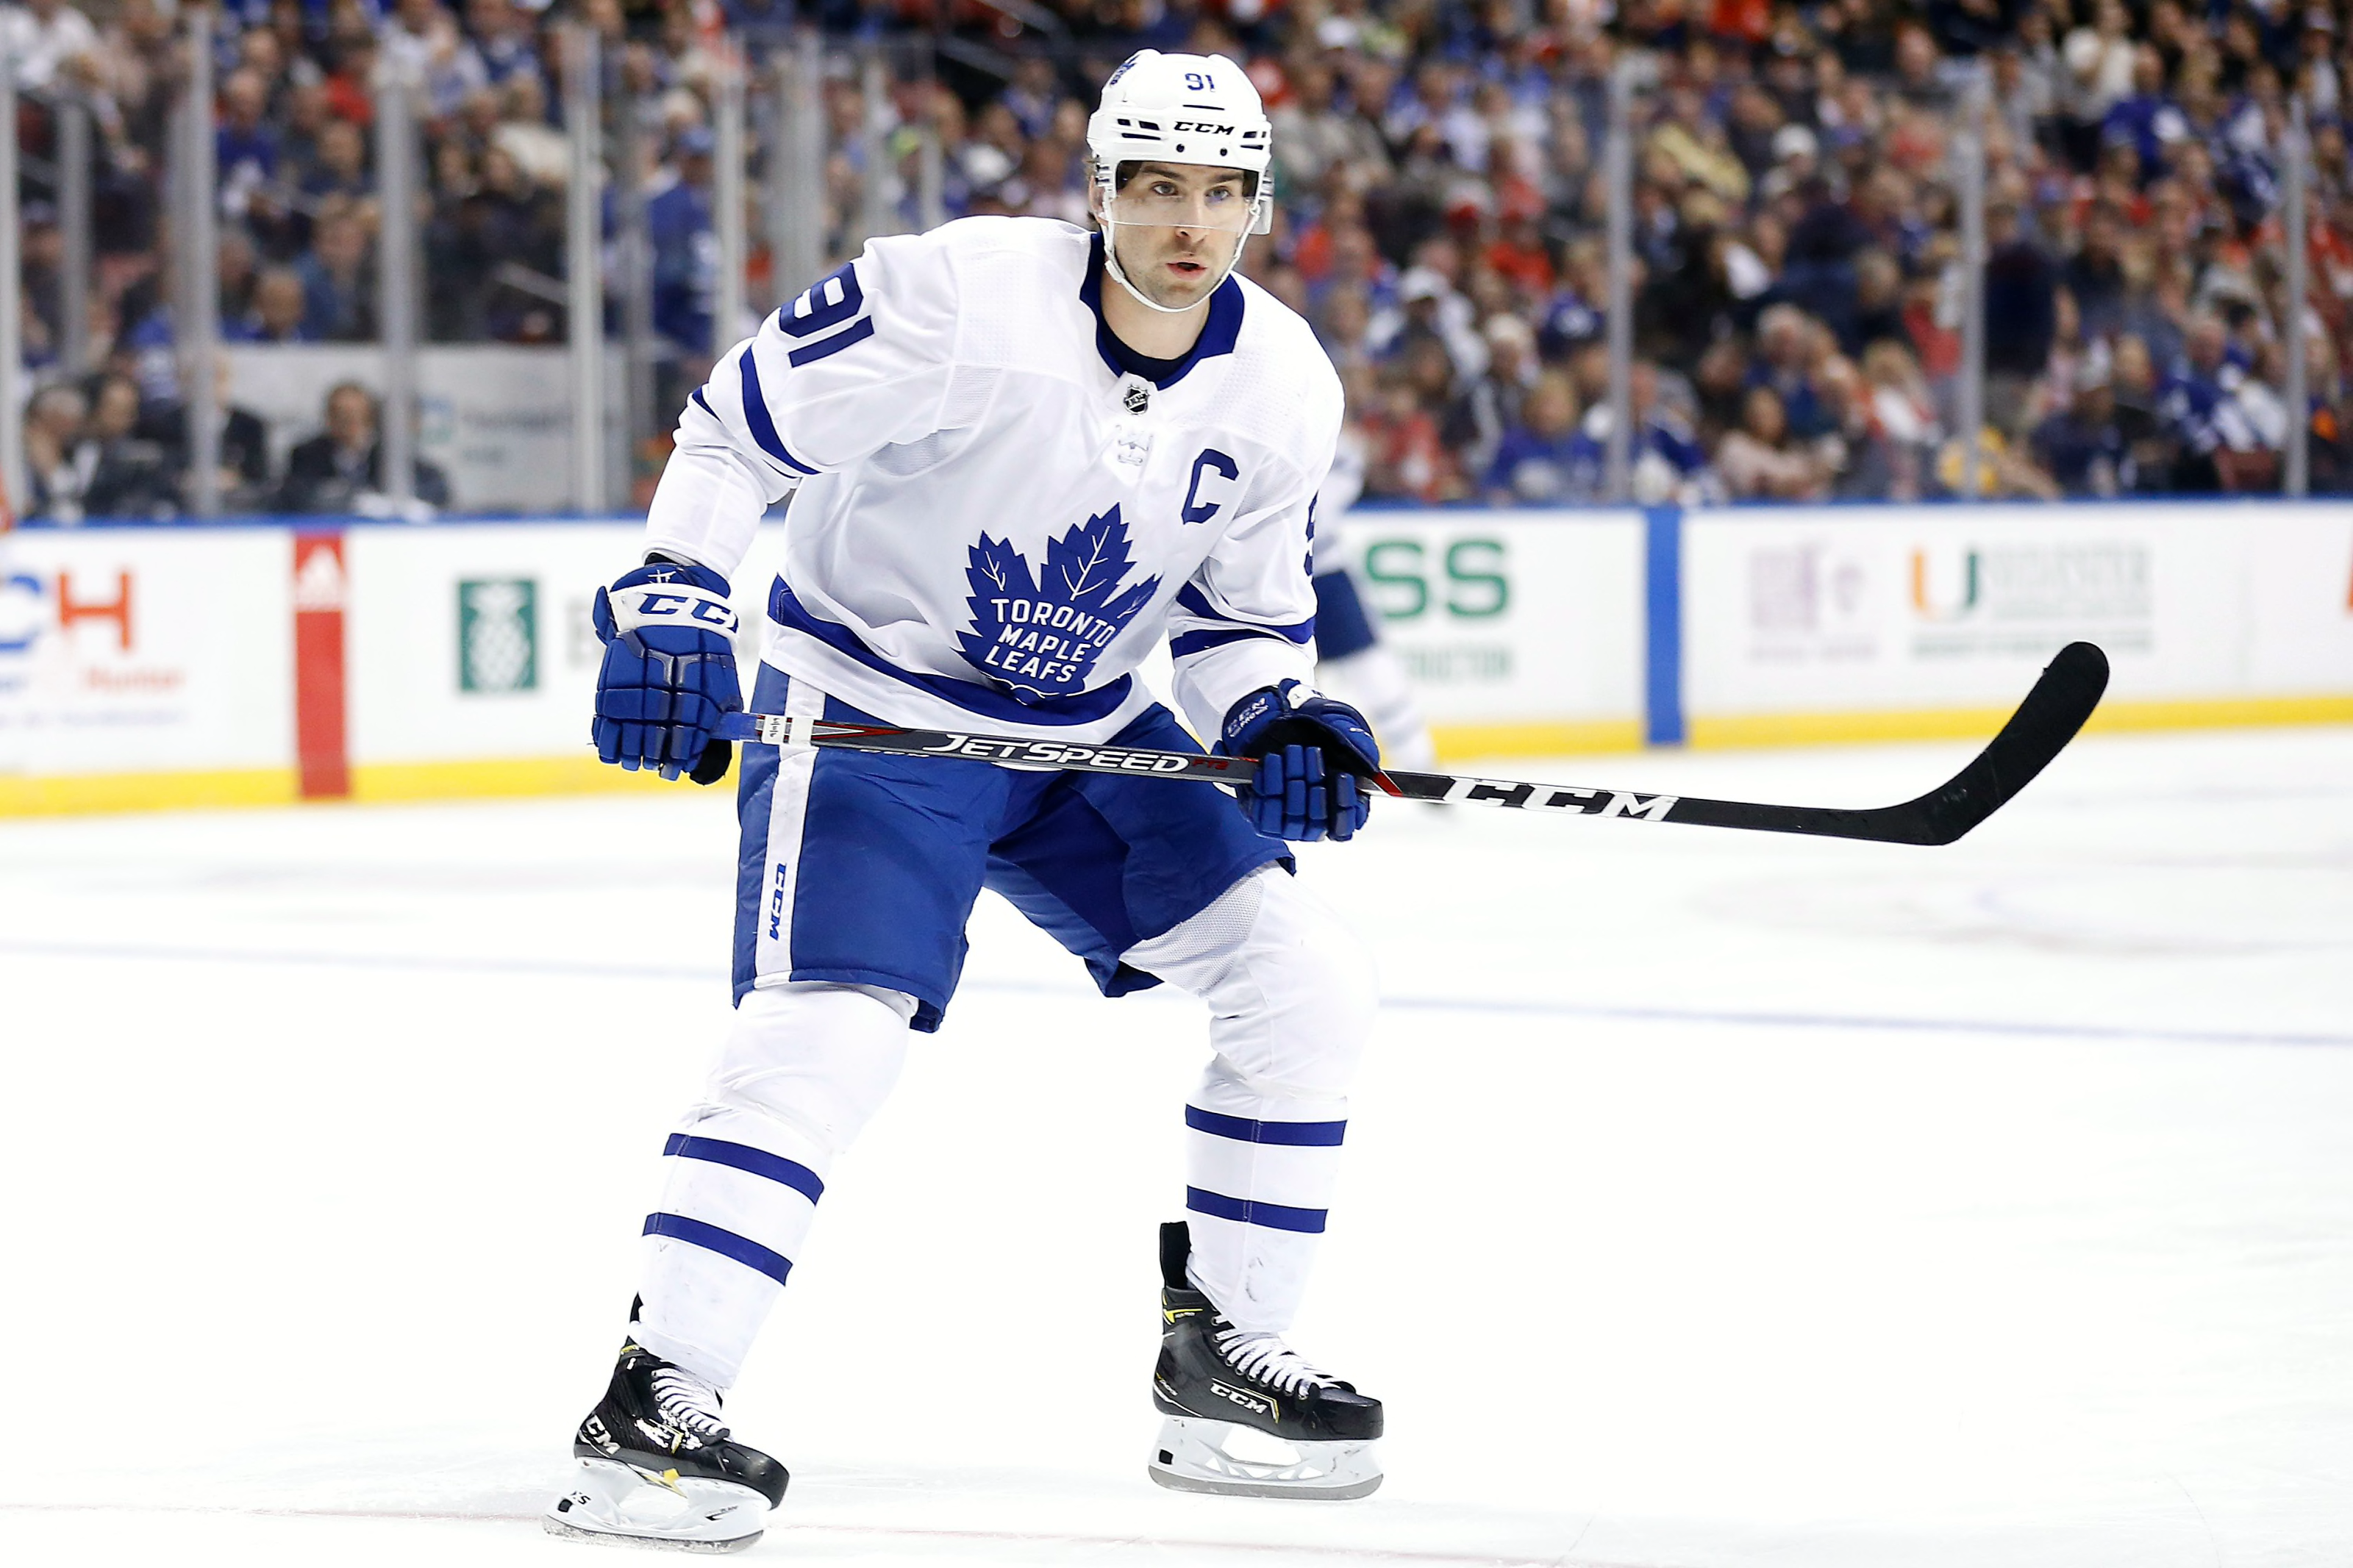 Toronto Maple Leafs: Grading Every Reverse Retro Jersey From A-Z